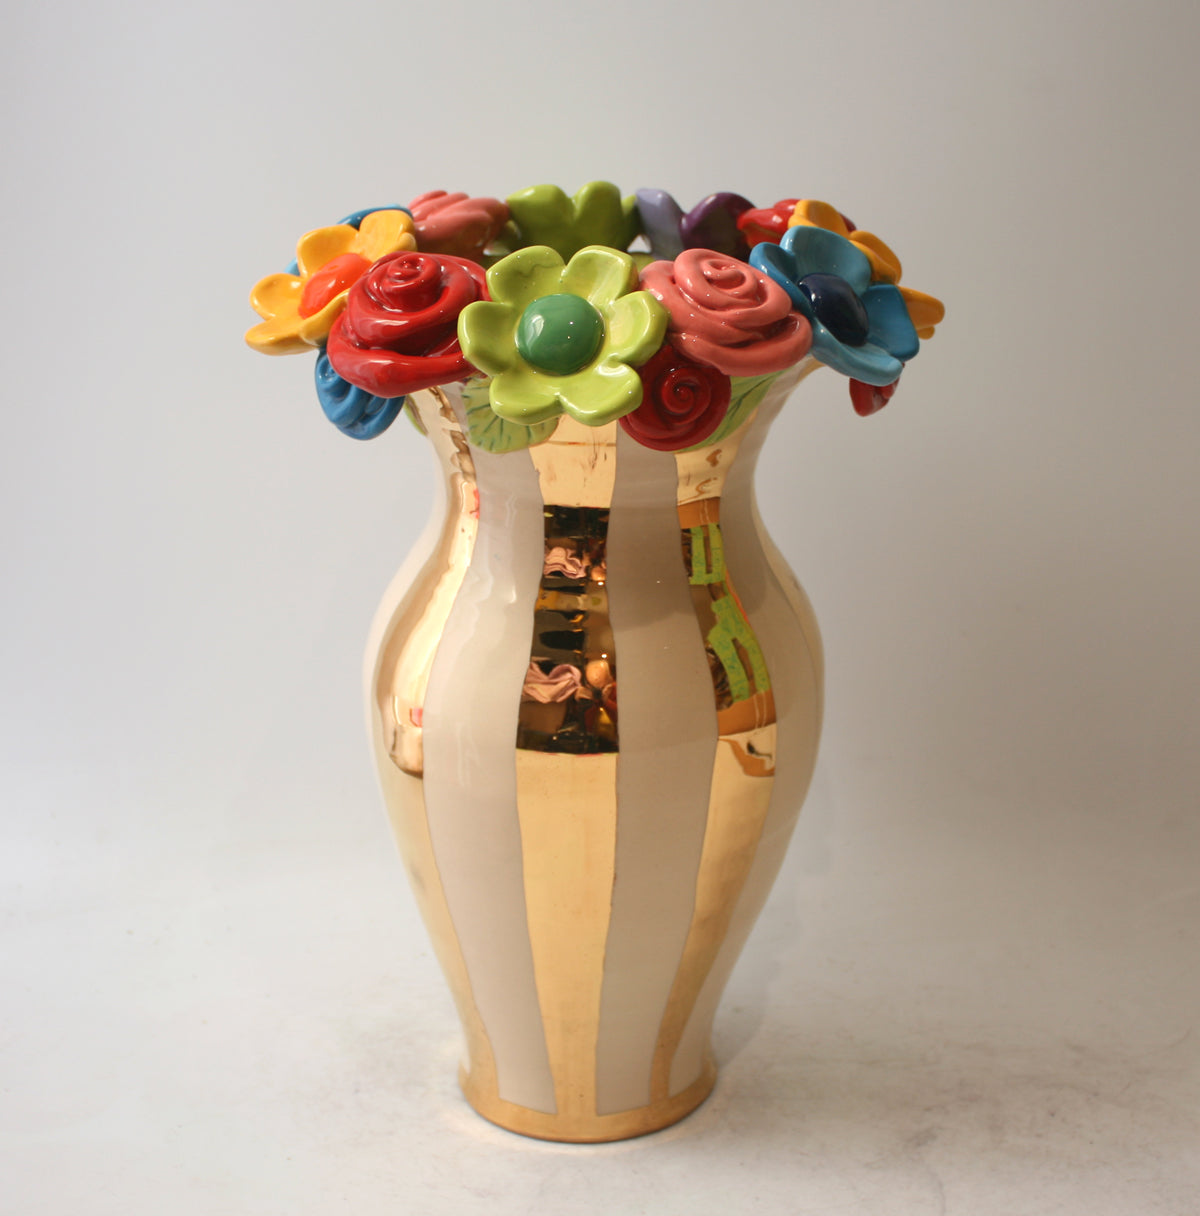 Large Multiflower Encrusted Vase in Gold and White Stripes